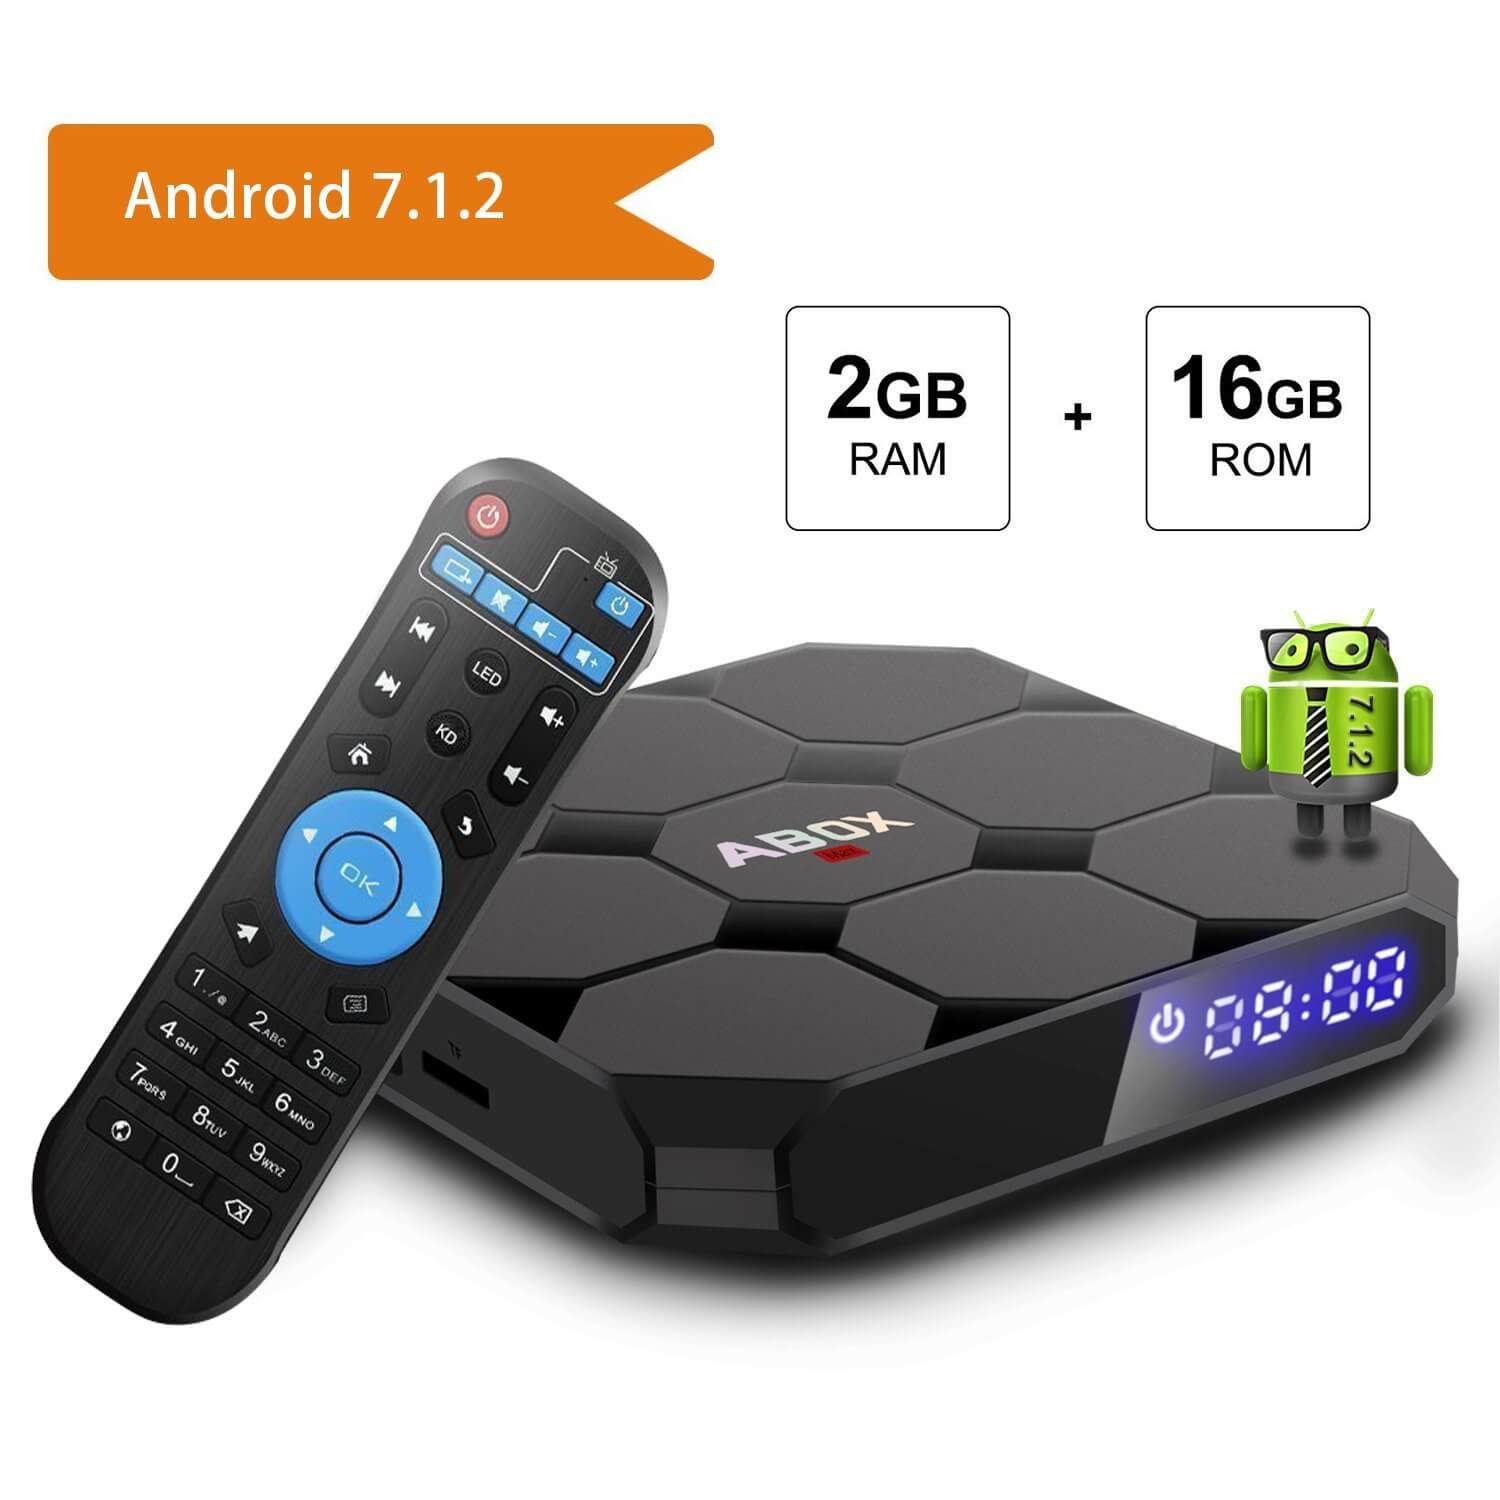  android-box